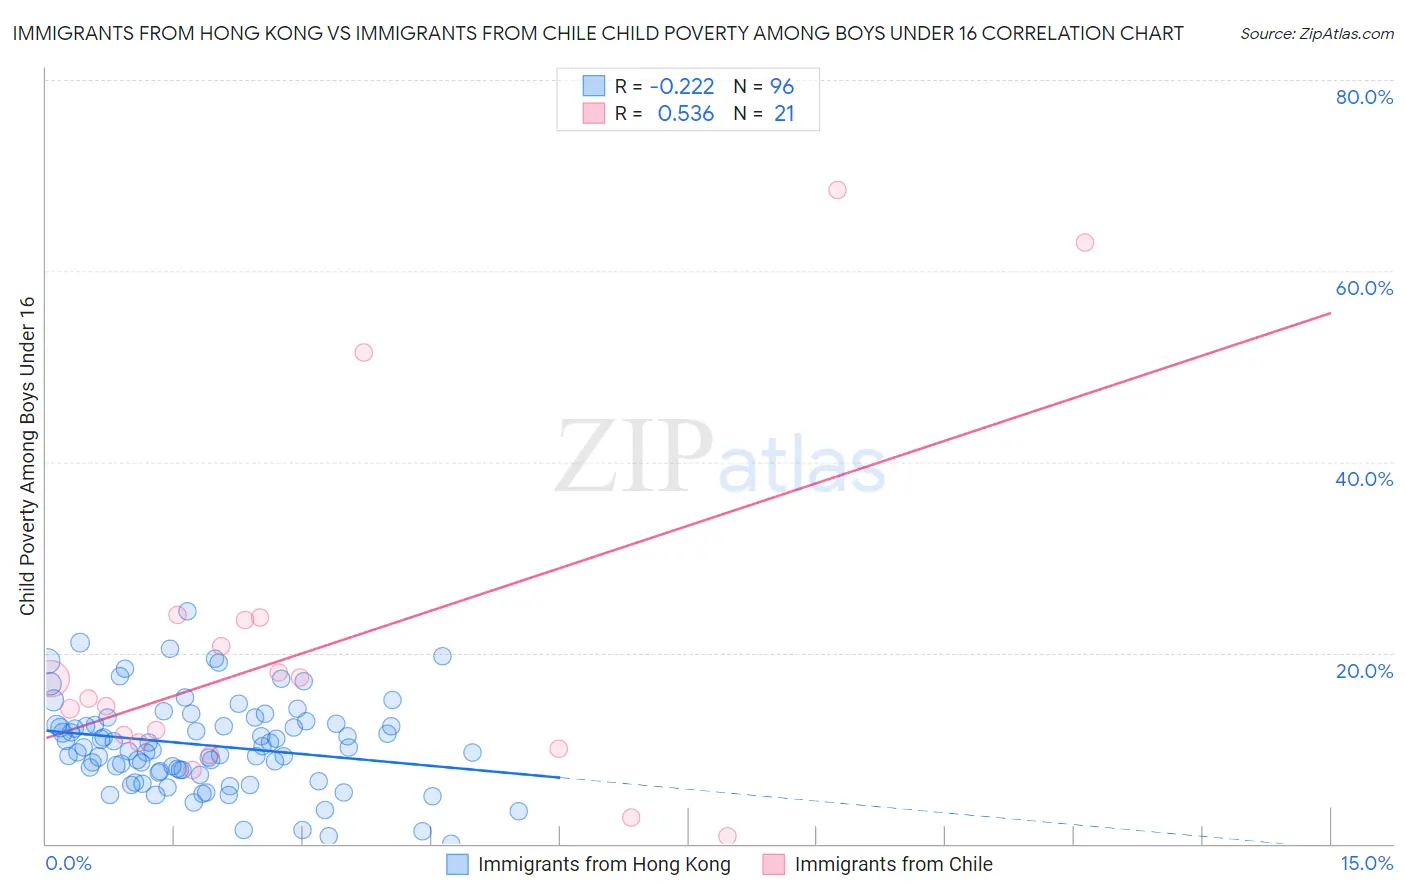 Immigrants from Hong Kong vs Immigrants from Chile Child Poverty Among Boys Under 16